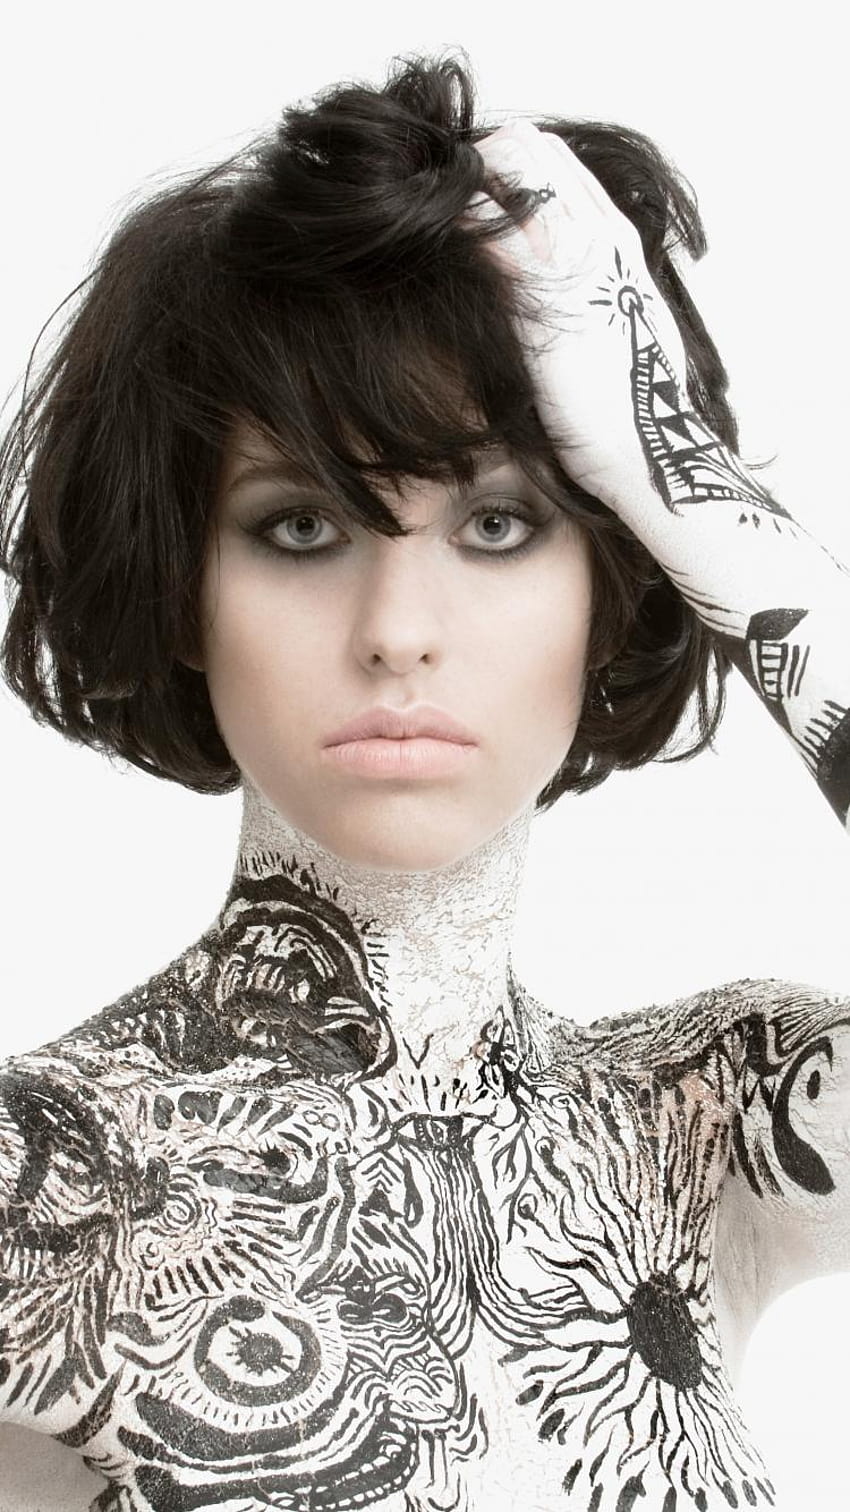 Paper Tiger Brings Night of Indie Electronica with New Zealand's Kimbra |  Music Stories & Interviews | San Antonio | San Antonio Current